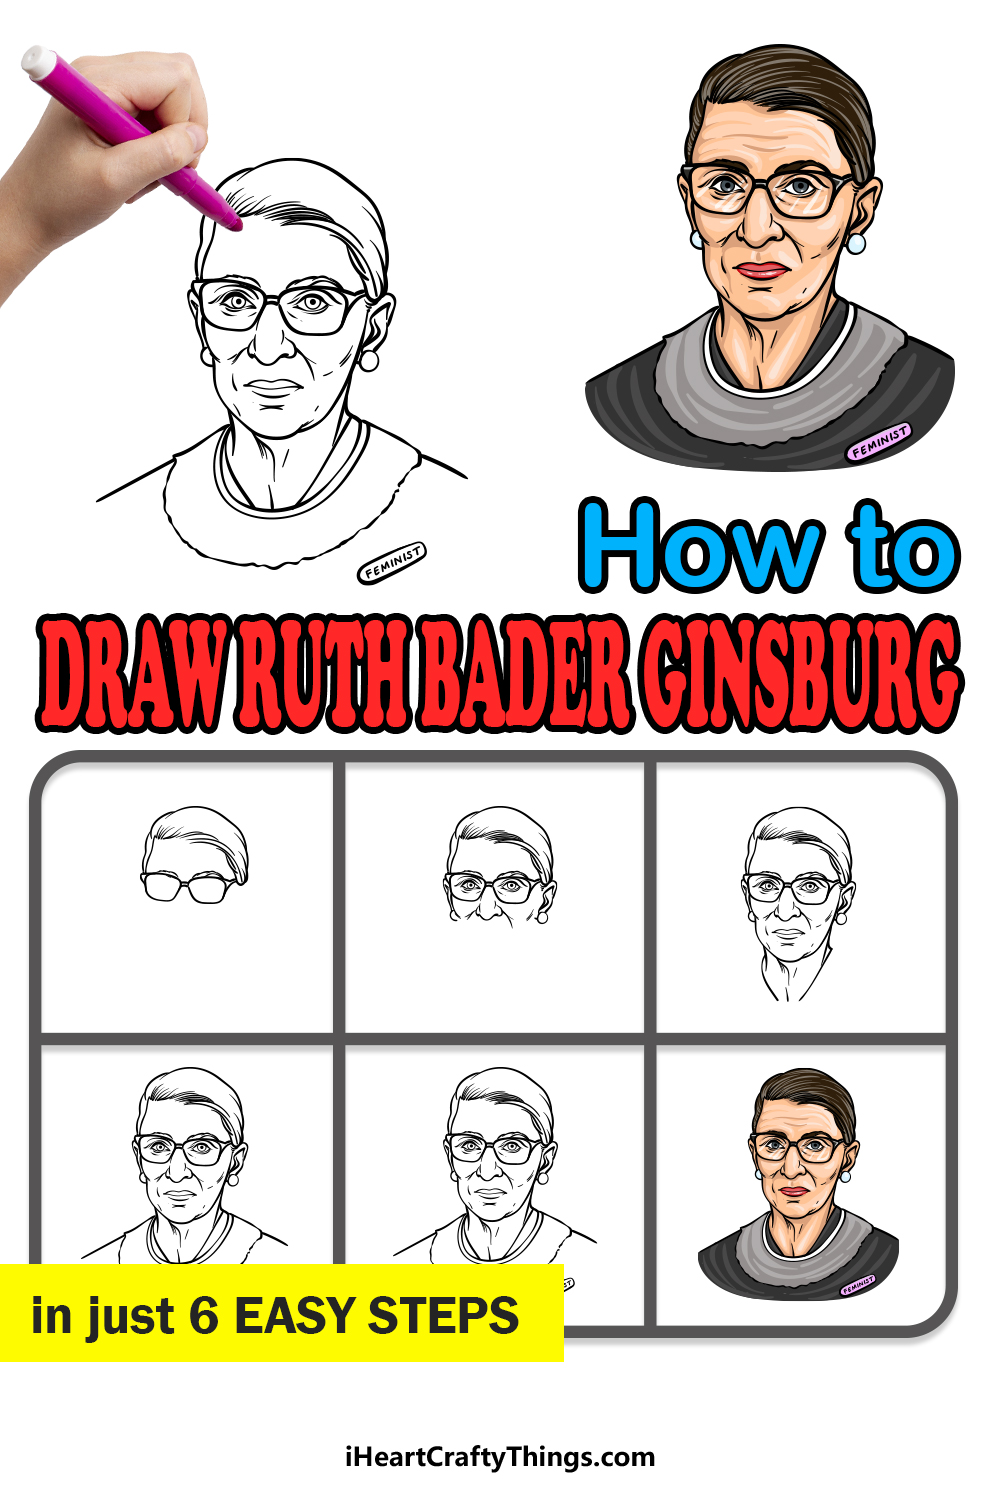 how to draw Ruth Bader Ginsburg in 6 easy steps